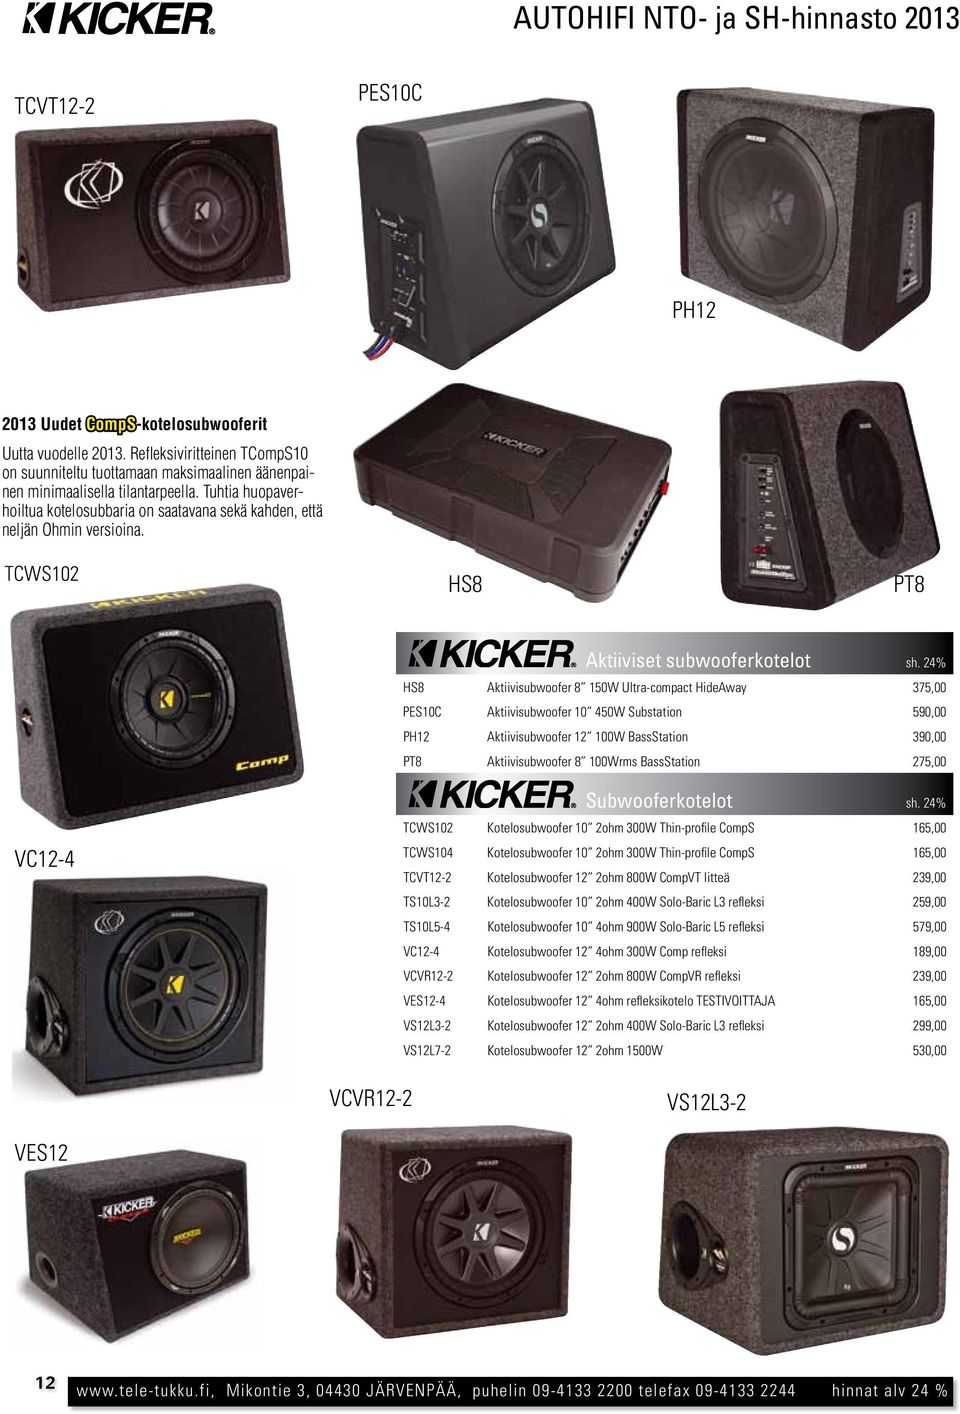 24% HS8 Aktiivisubwoofer 8 150W Ultra-compact HideAway 375,00 PES10C Aktiivisubwoofer 10 450W Substation 590,00 PH12 Aktiivisubwoofer 12 100W BassStation 390,00 PT8 Aktiivisubwoofer 8 100Wrms